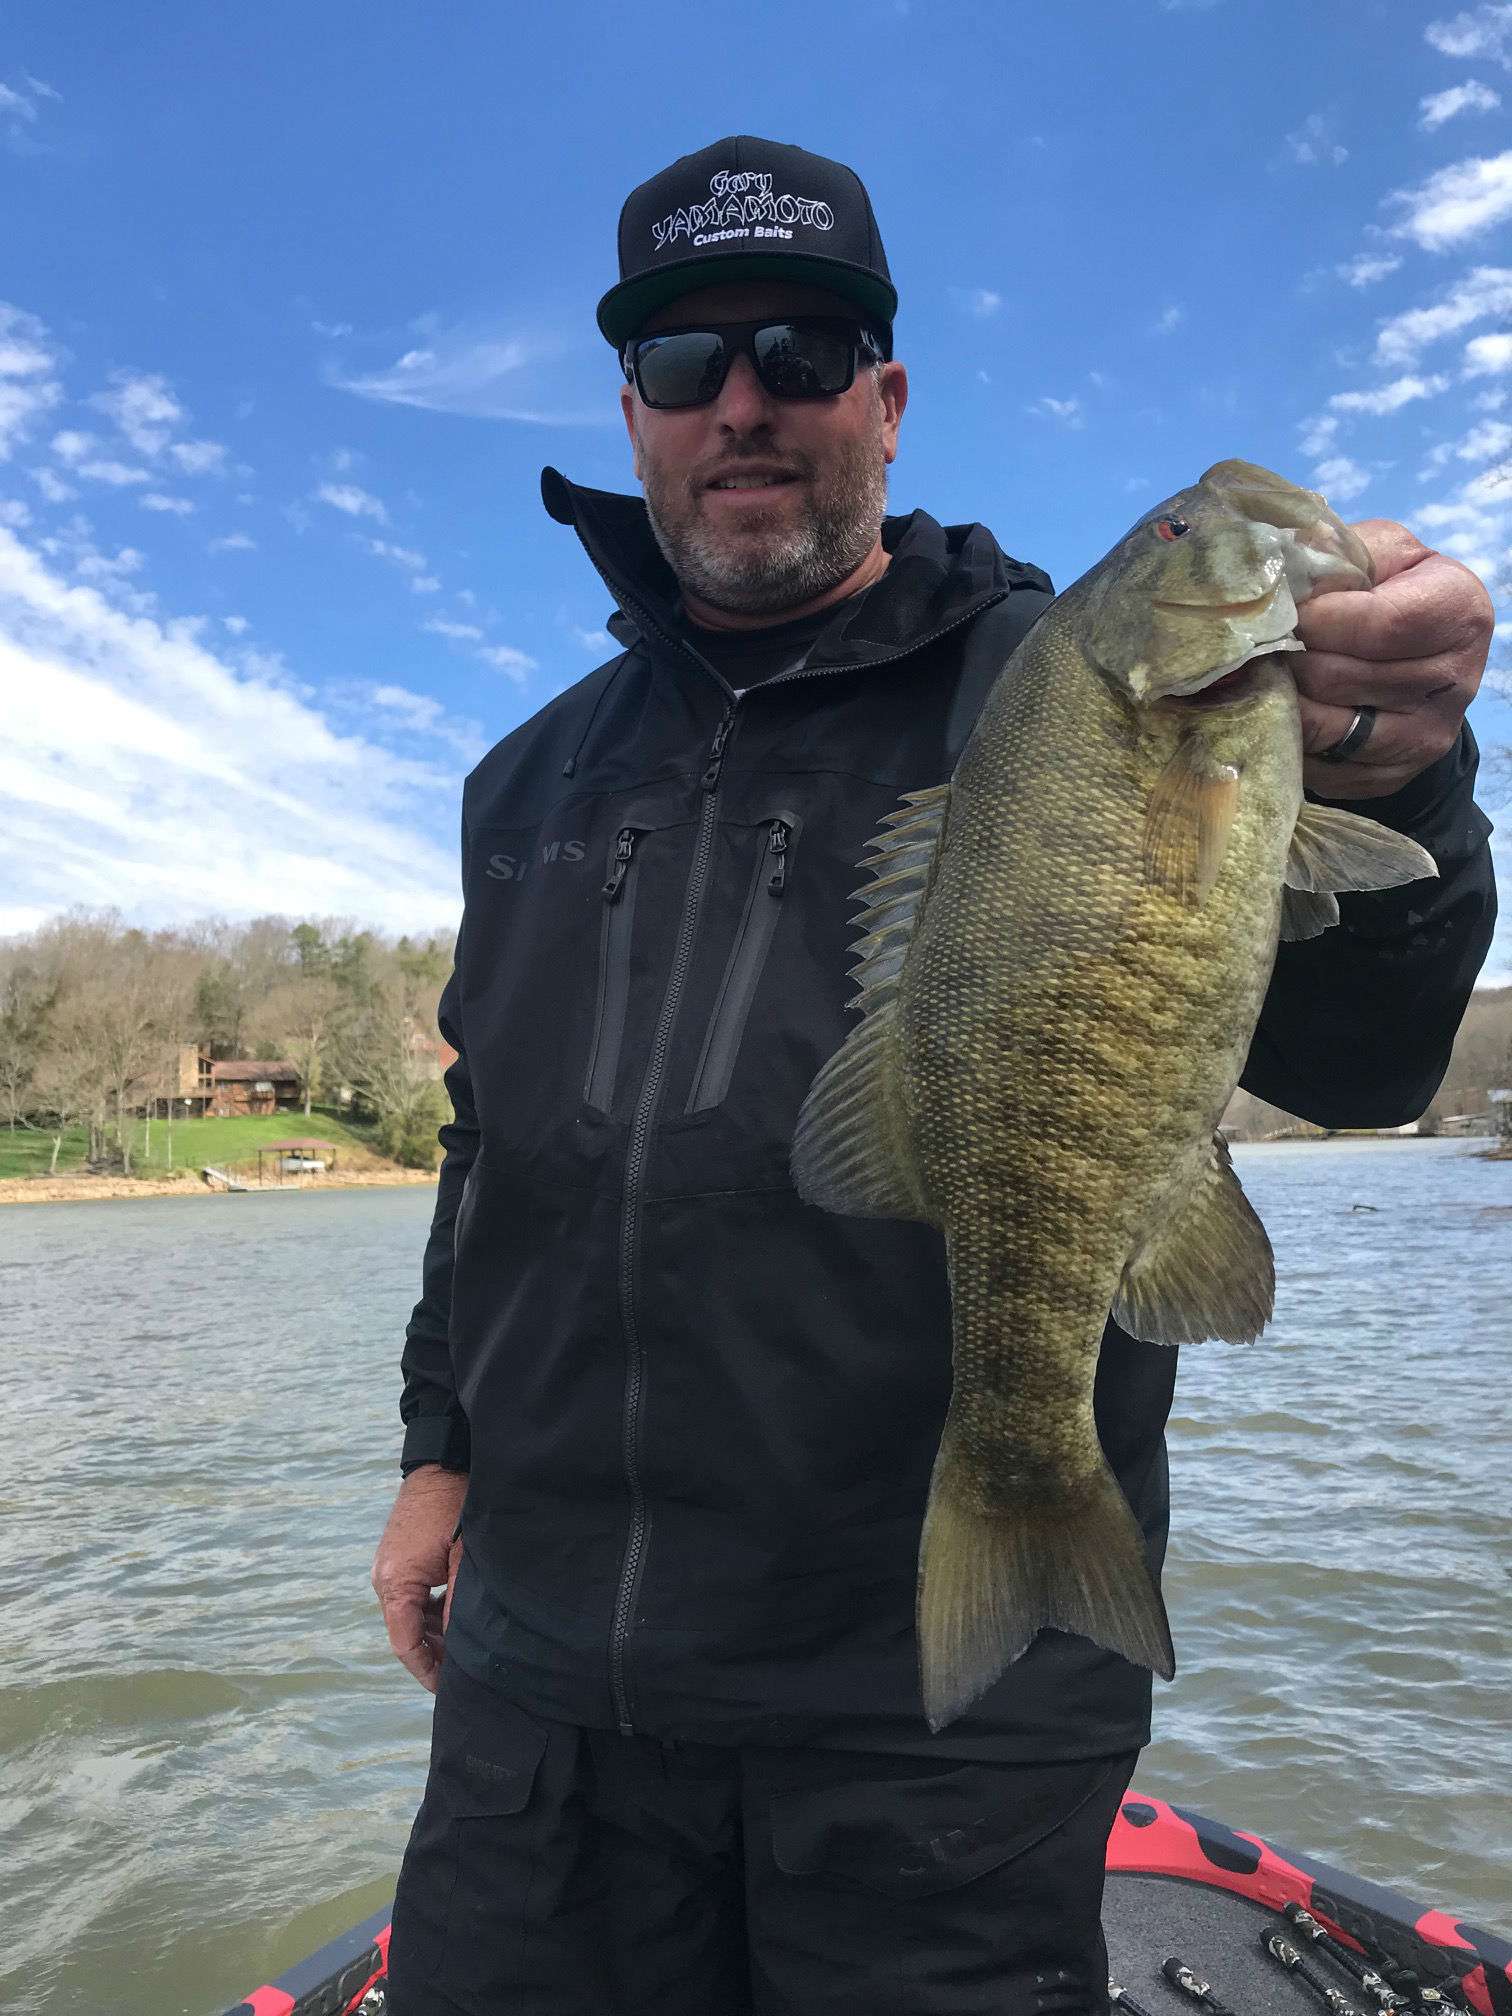 After a slow morning that produced just two keepers and a handful of short fish, Brett Hite made a move at 12:30 that immediately paid off with a 3-pound smallmouth. 